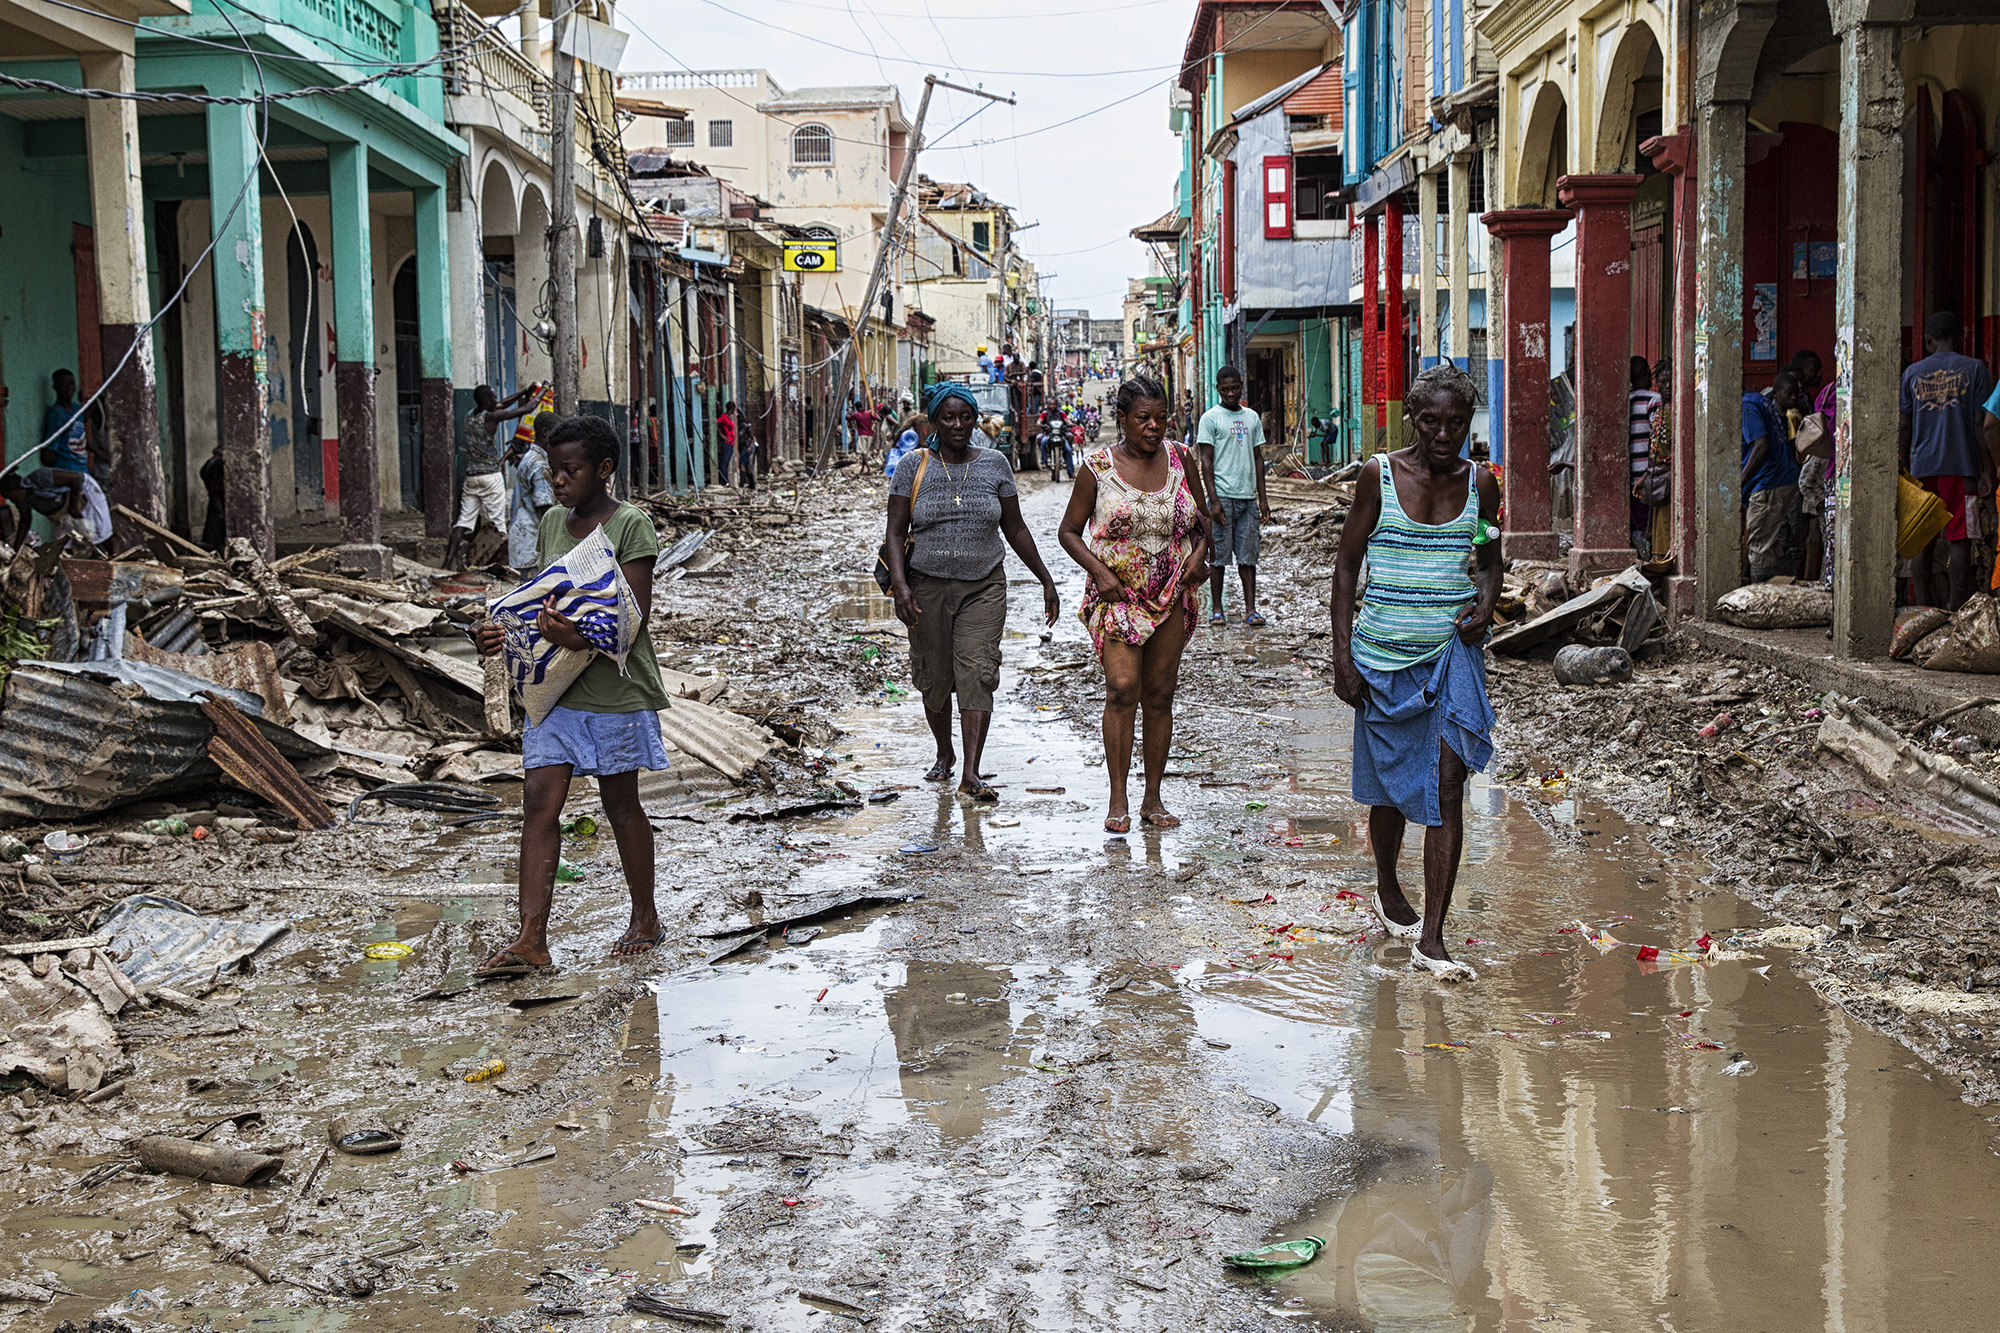 Haiti in the aftermath of a hurricane